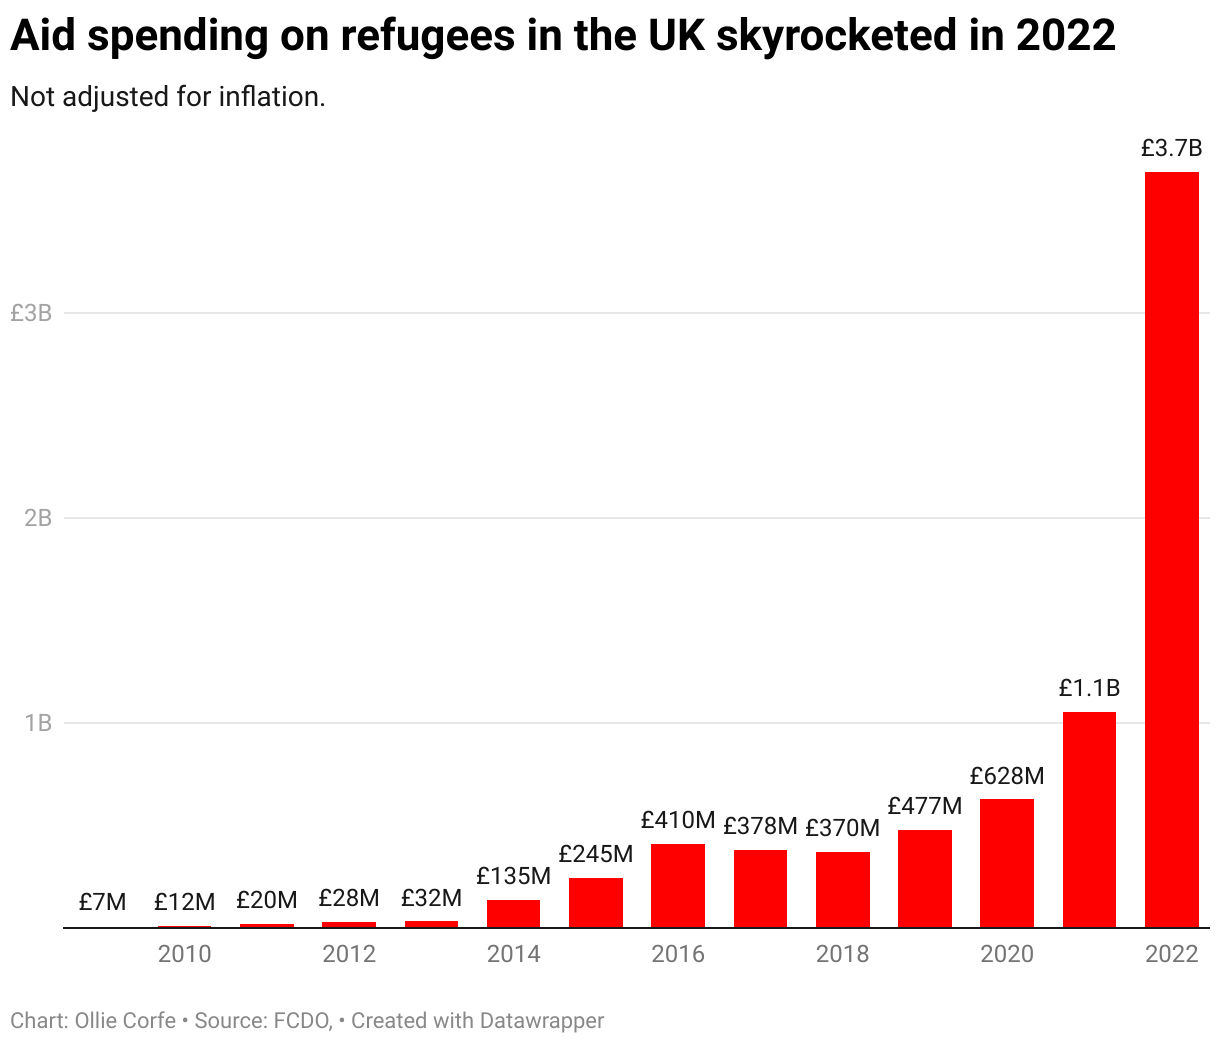 Aid spending on refugees in the UK per year.